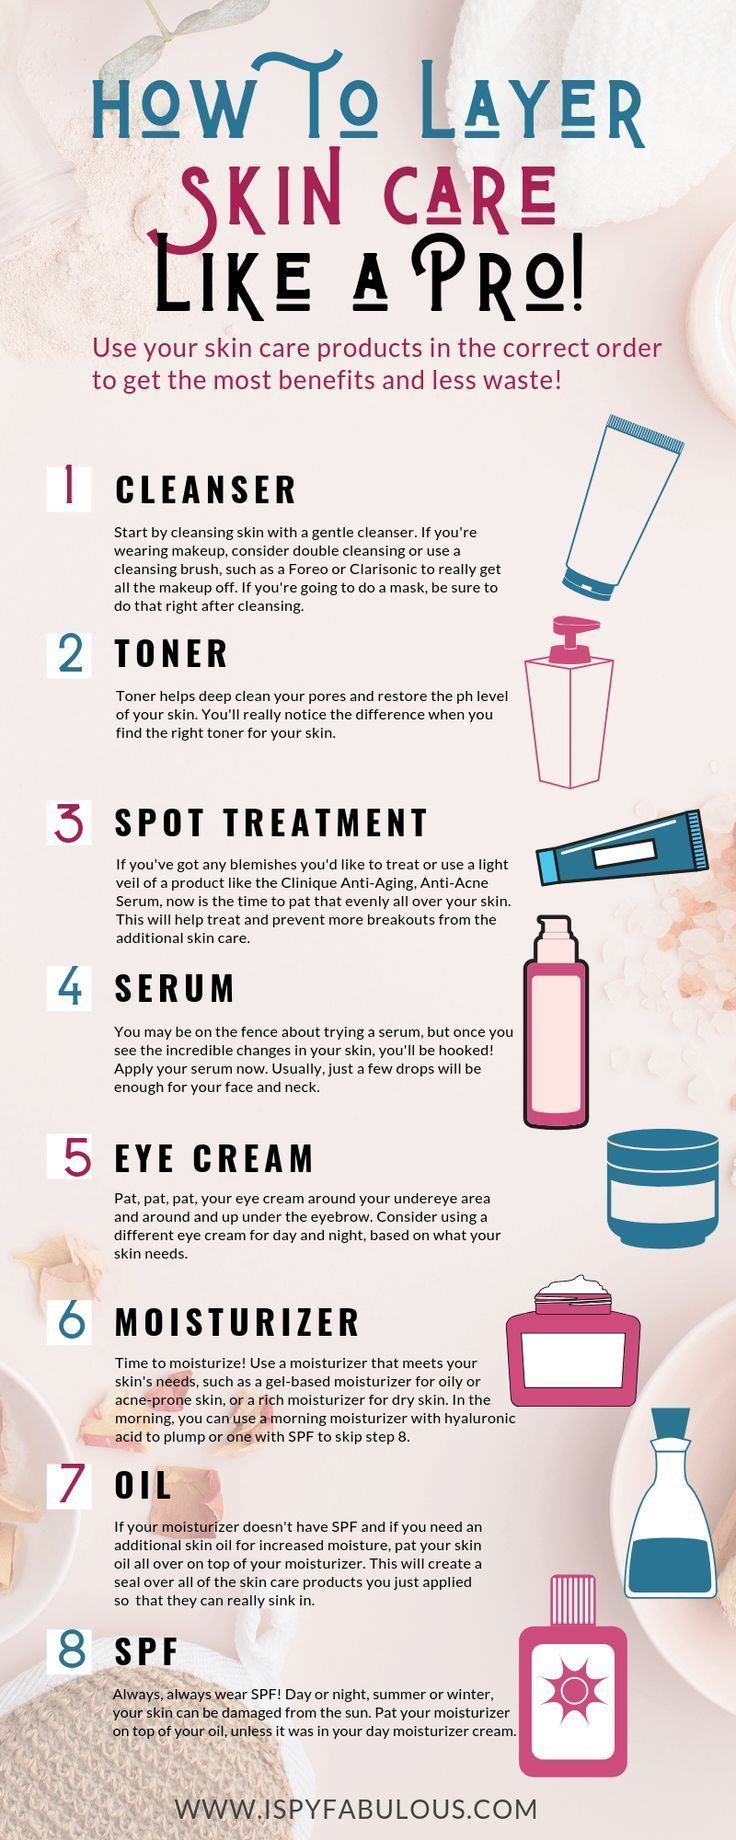 19 beauty Tips products ideas